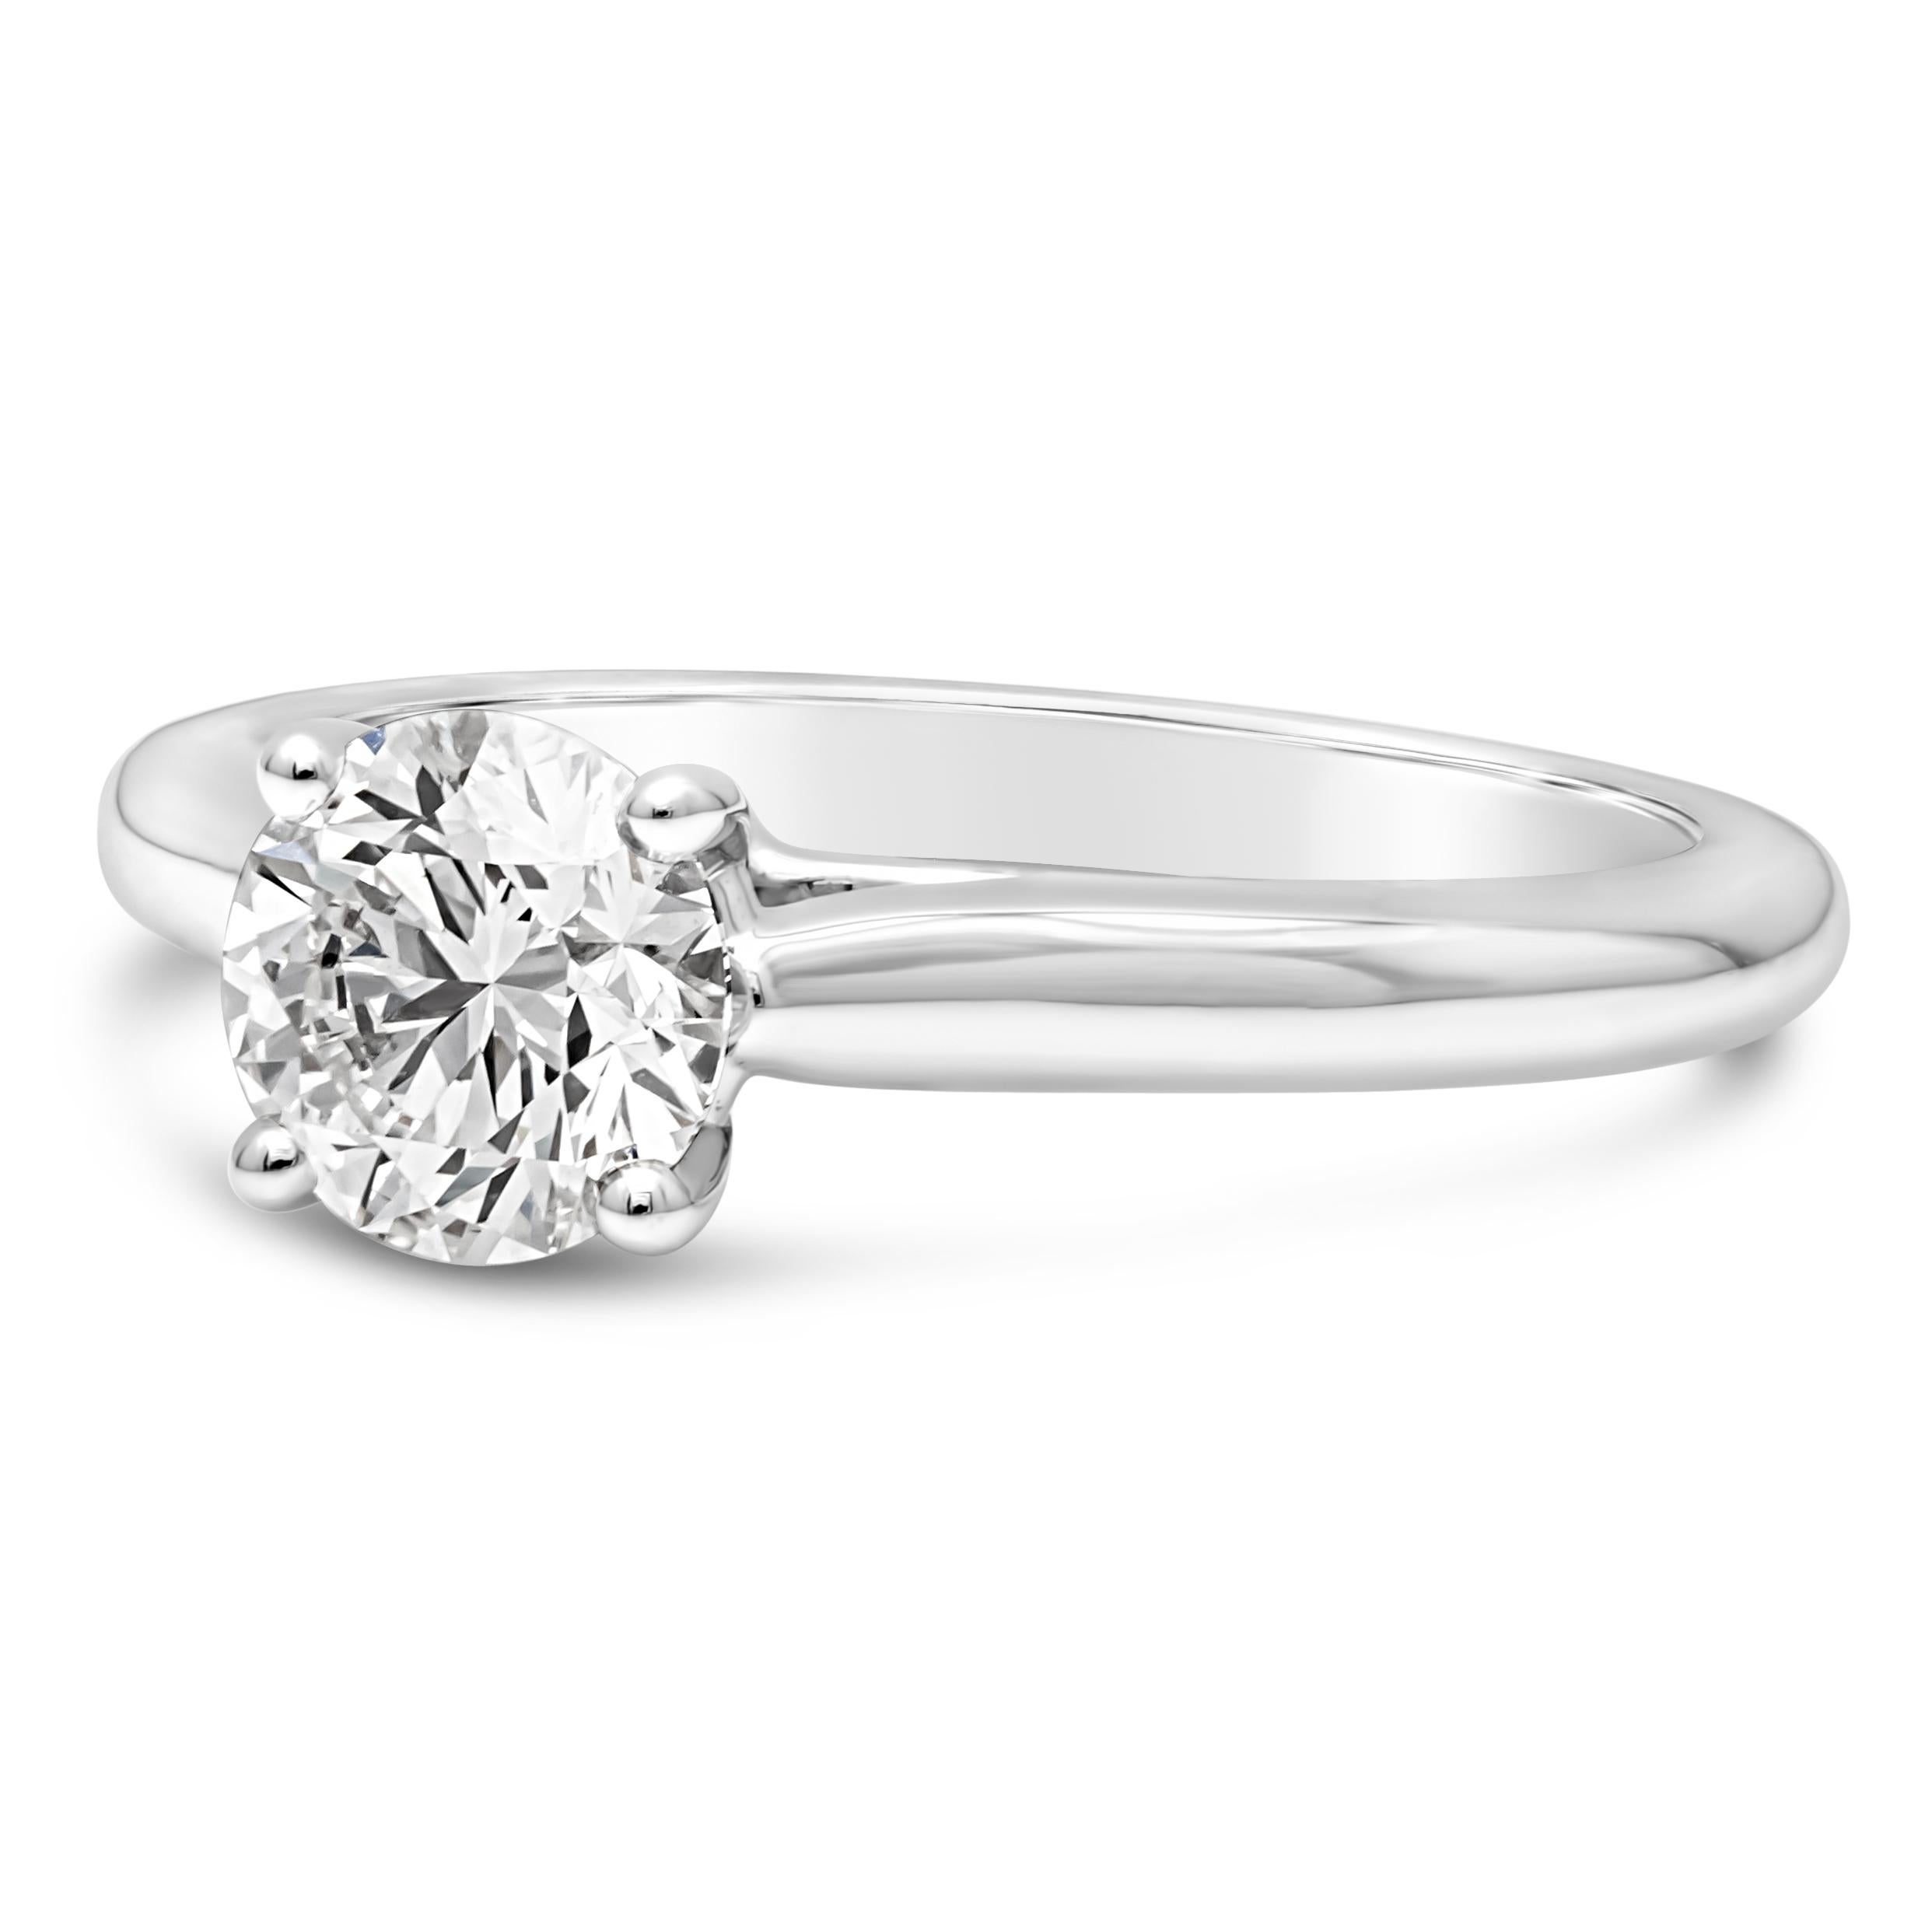 cartier 1895 engagement ring price